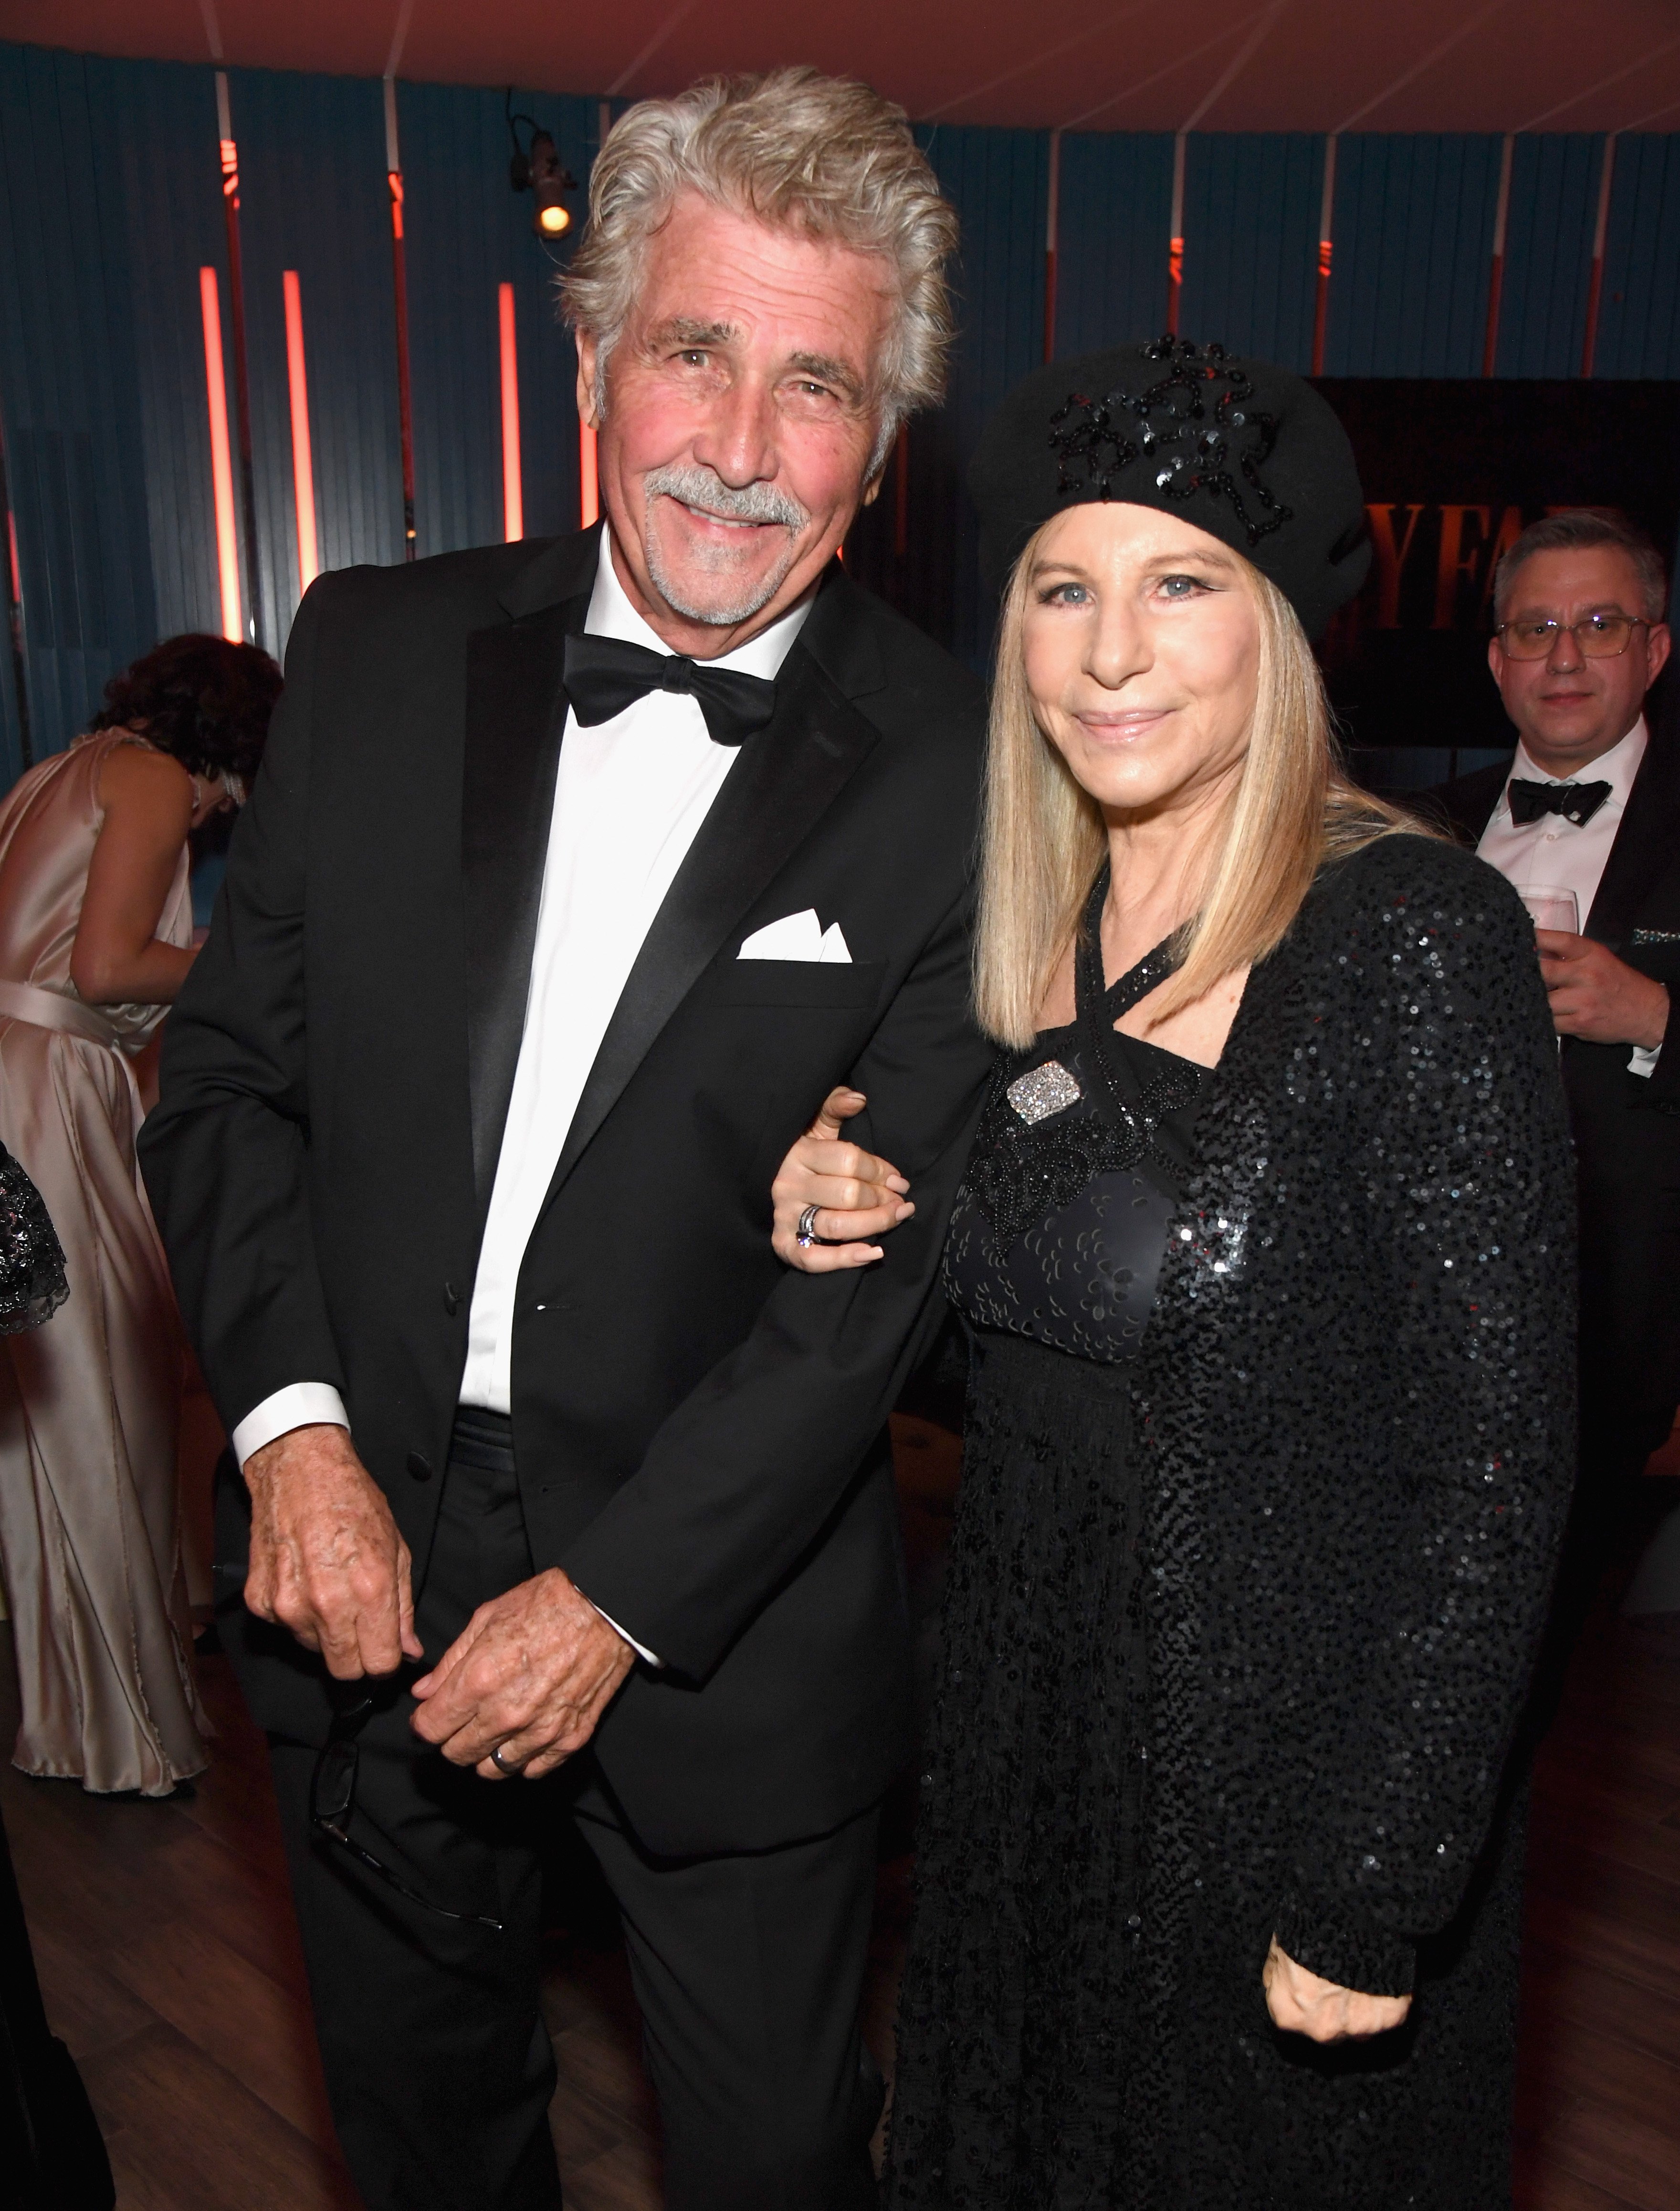 Barbara Streisand and James Brolin in California in 2019 | Source: Getty Images